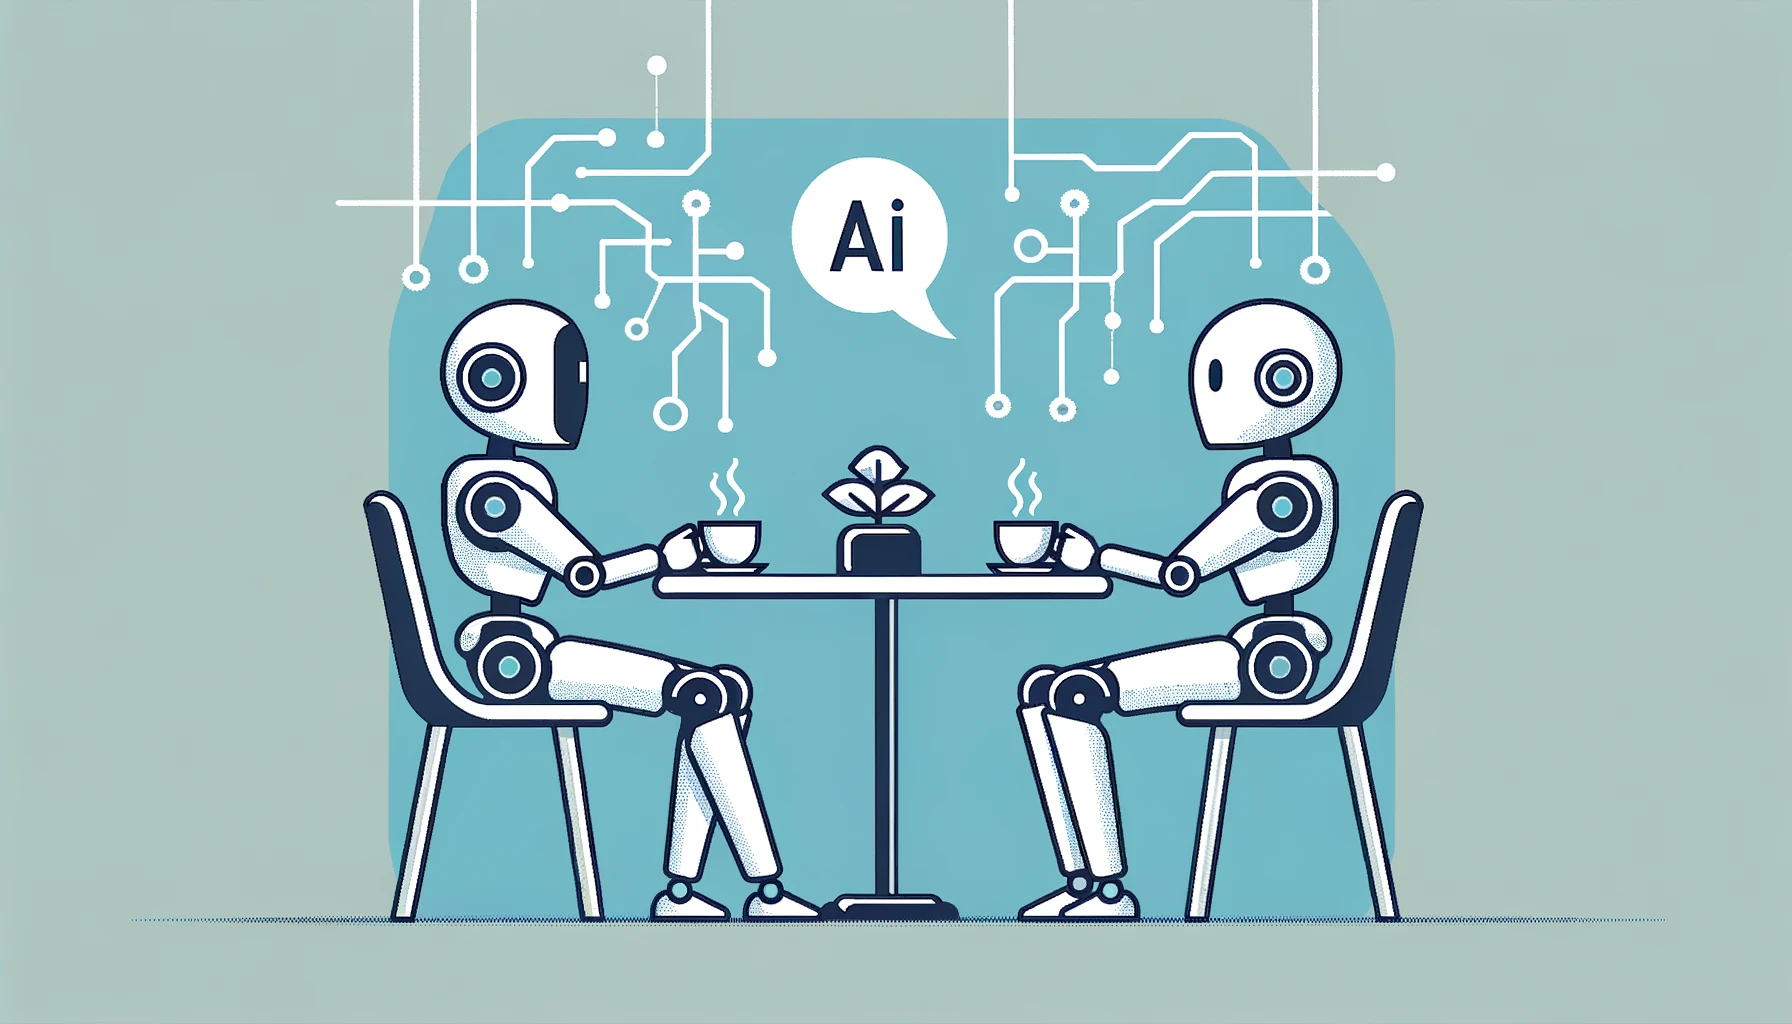 Anthropic asserts that its latest AI chatbot innovations surpass OpenAI's GPT-4